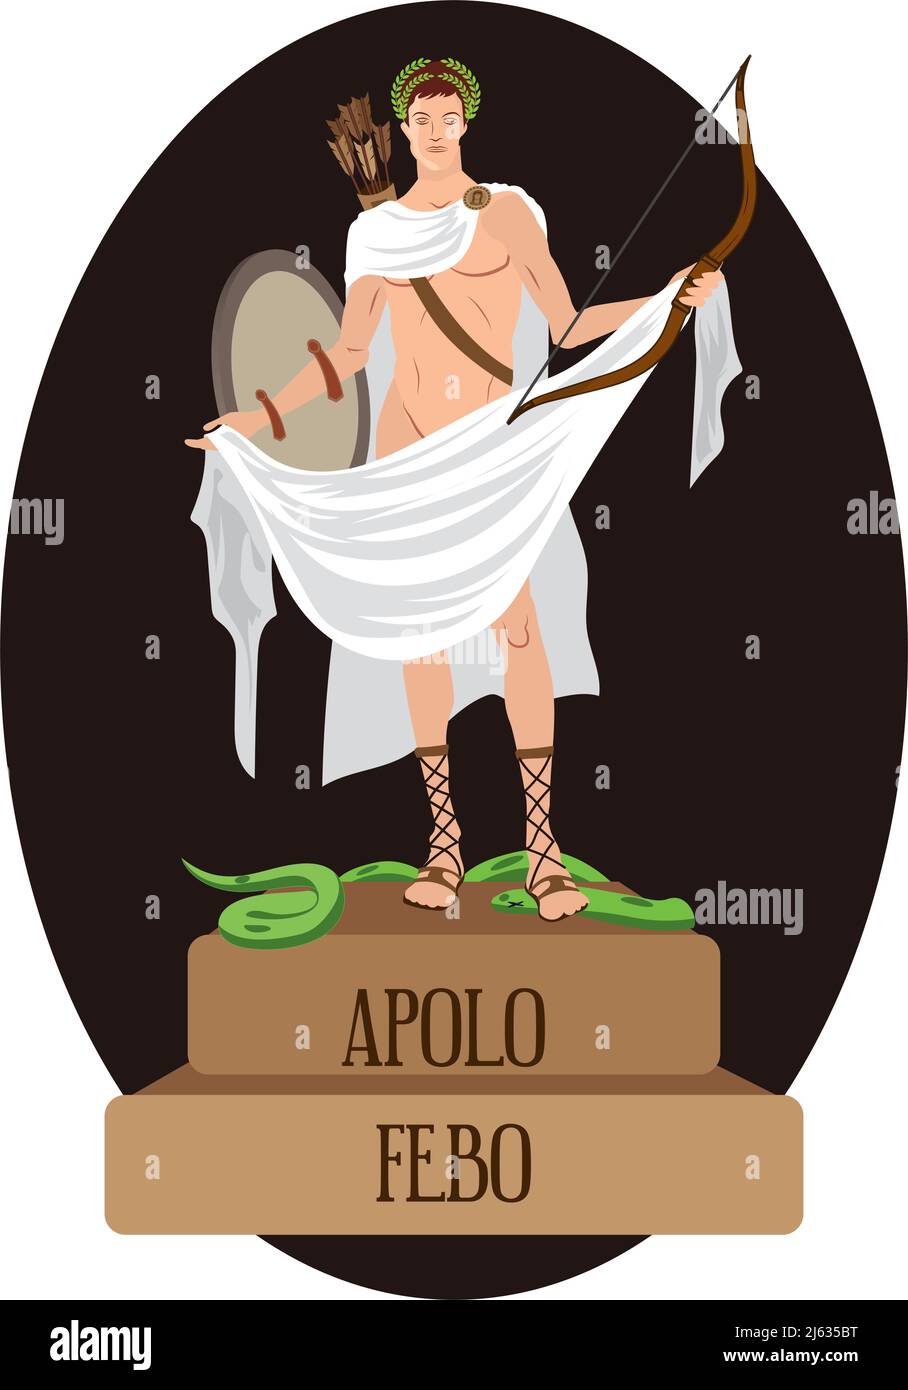 Illustration vector isolated of Roman and Greek gods, Febo, Apolo Stock Vector